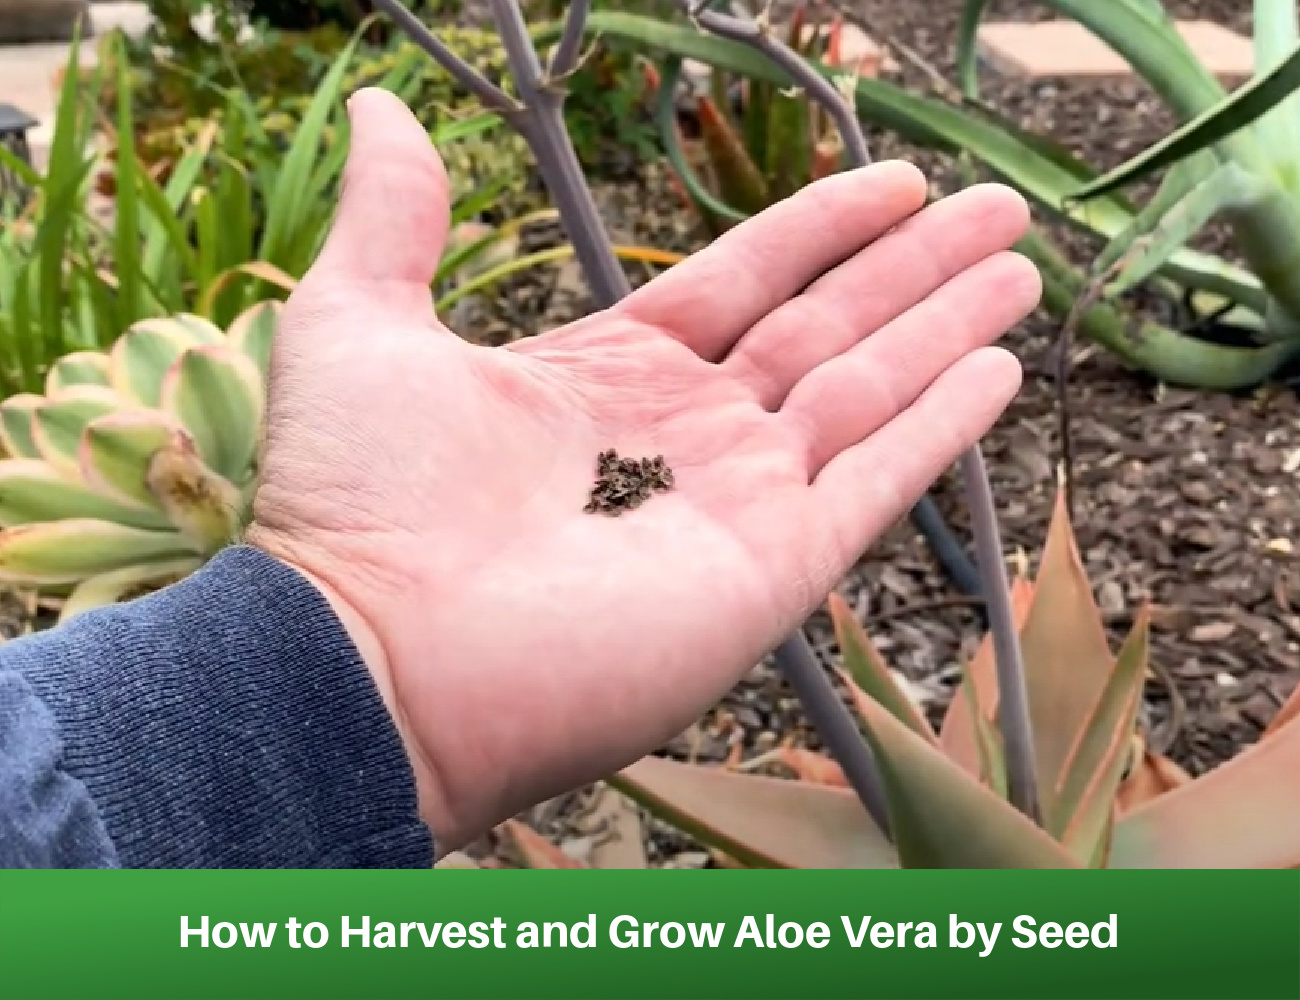 Harvest and Grow Aloe Vera by Seed